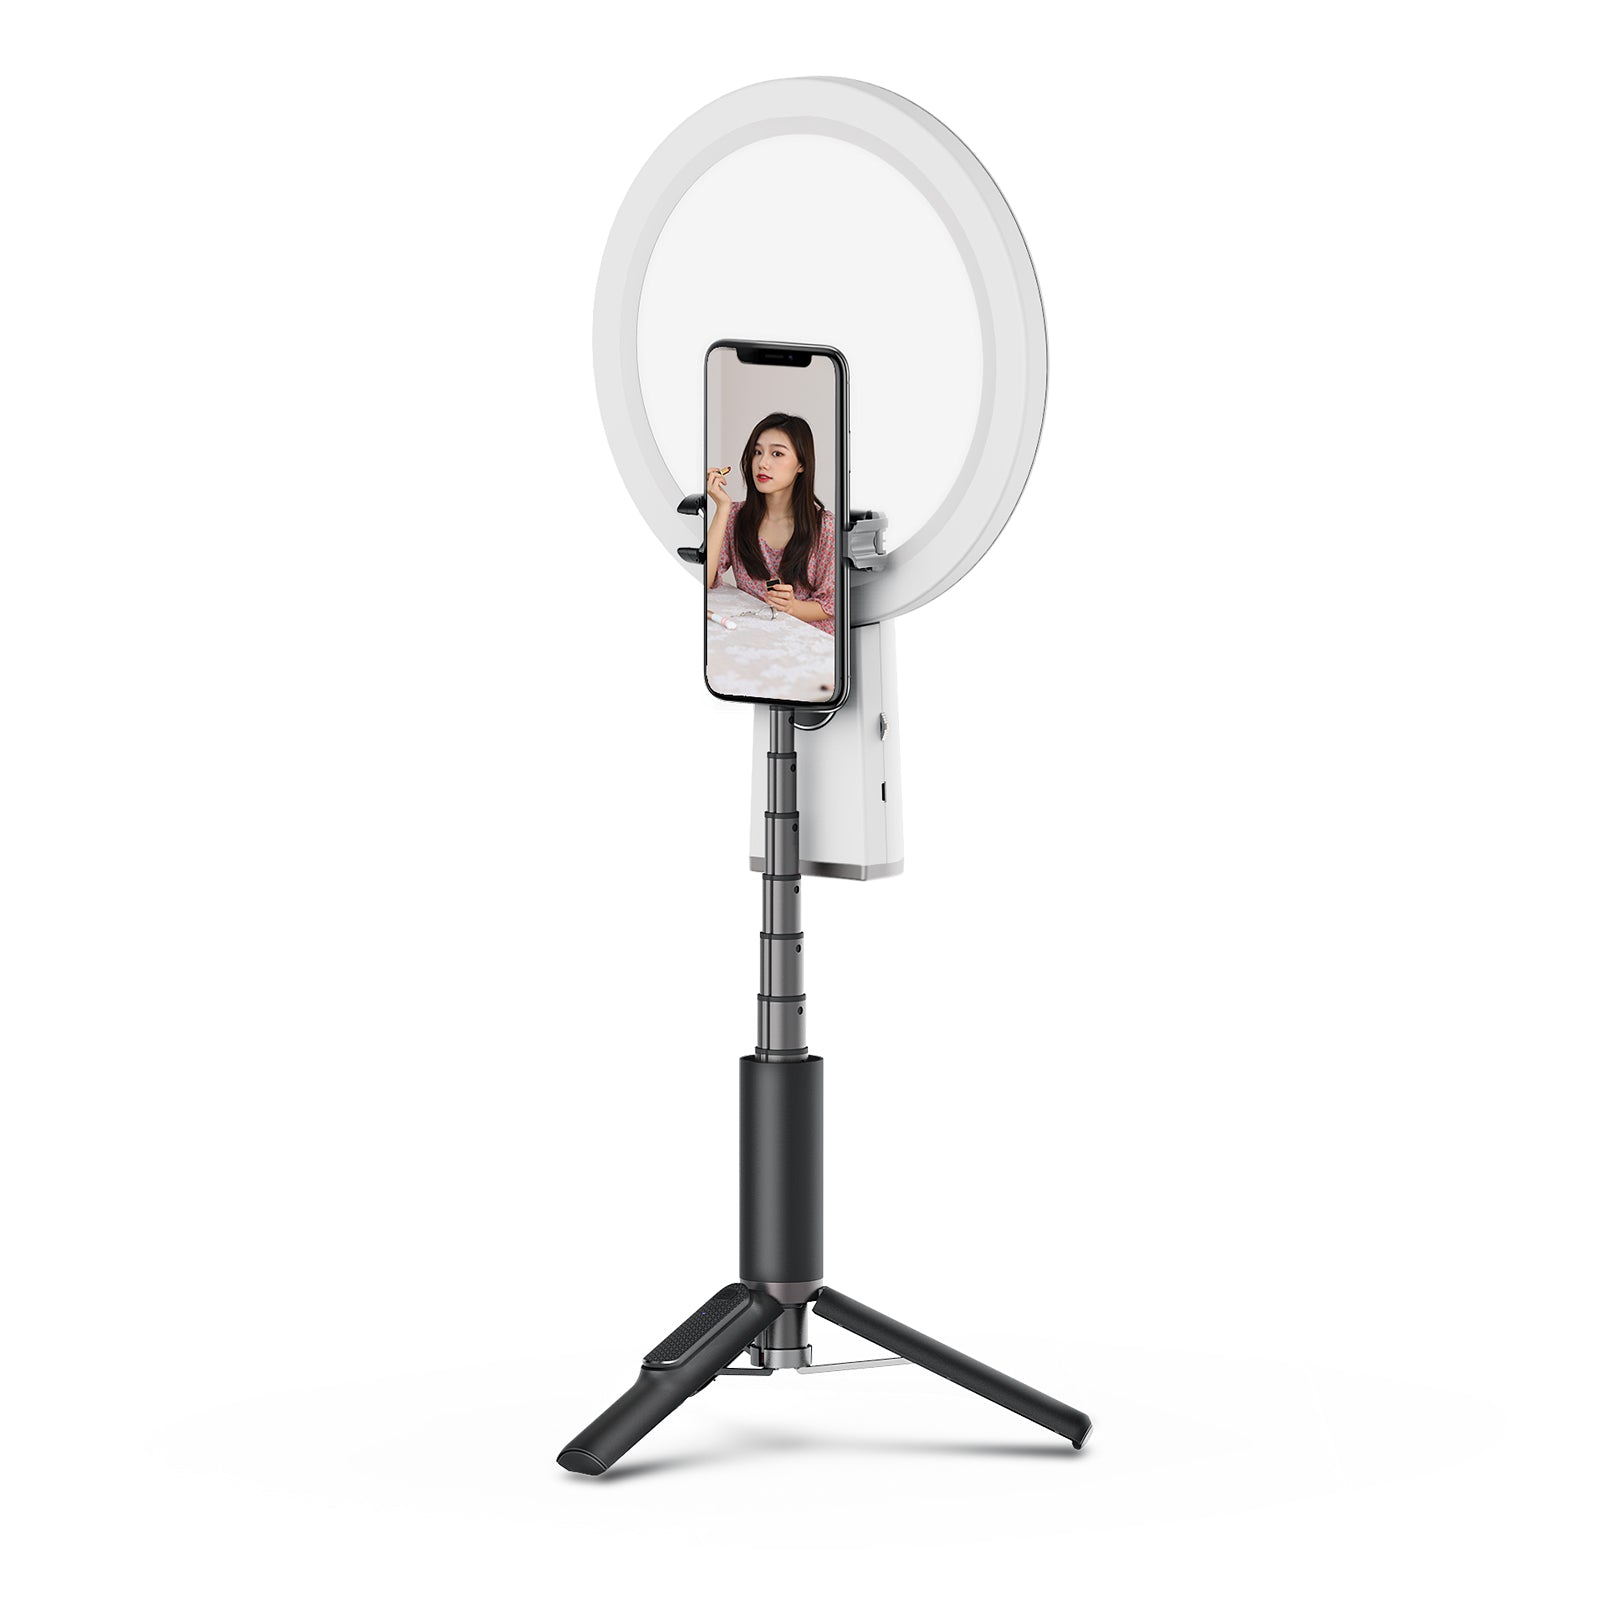 All-in-one Tripod Integrated Bluetooth Selfie Stick & Professional Fill Light